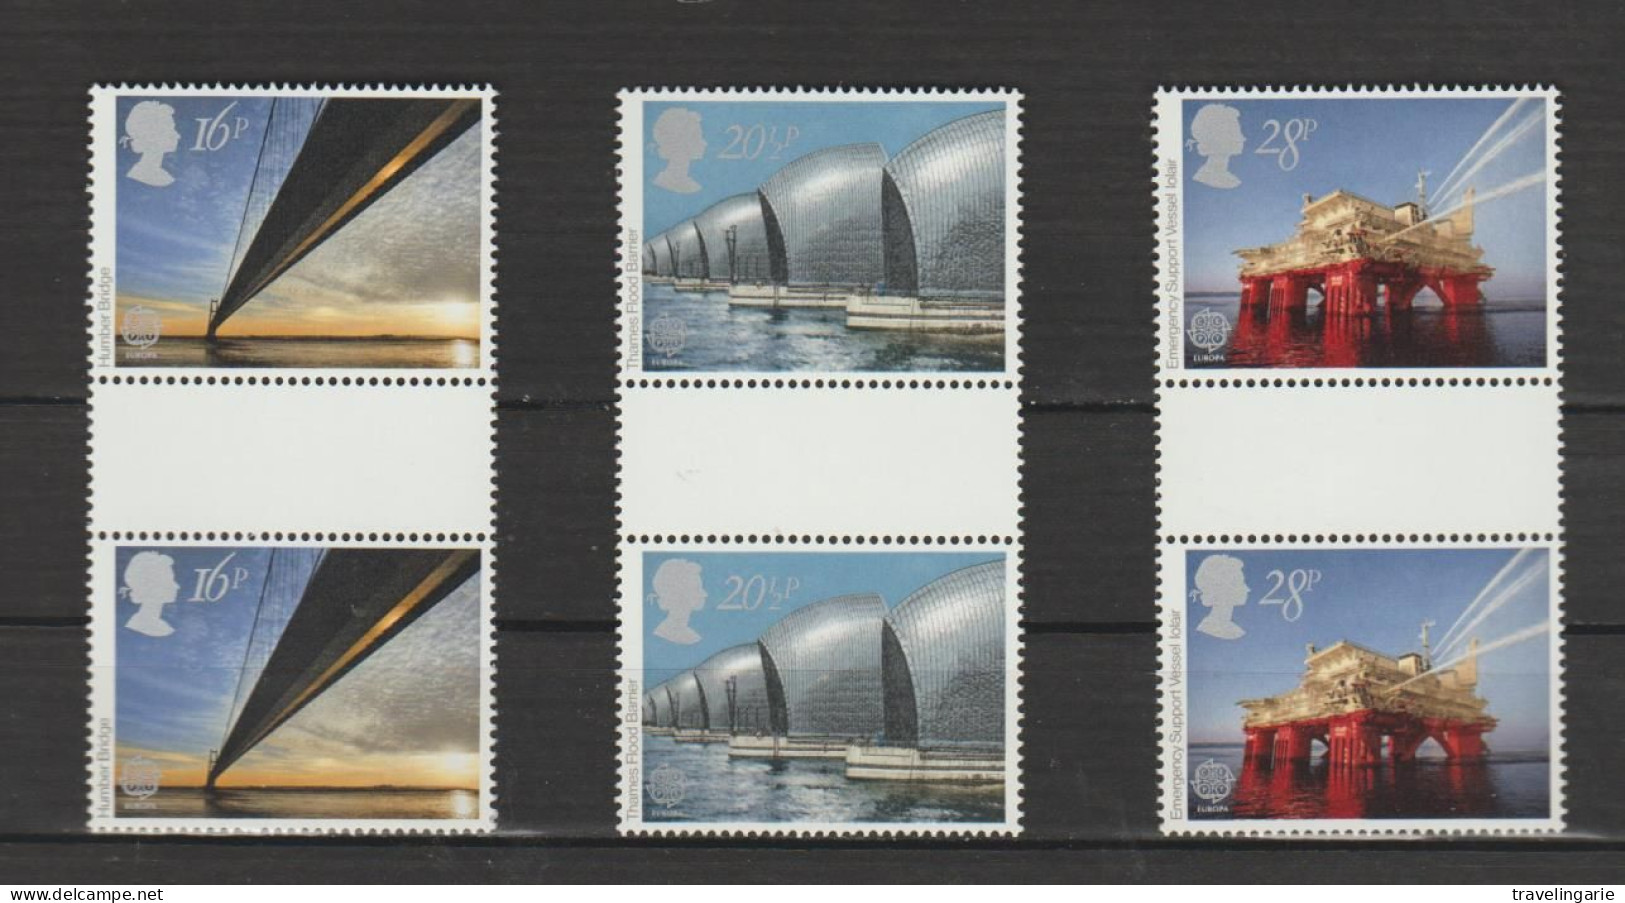 Great Britain 1983 Europe Cept Engineering Achievements Gutter Pairs MNH ** - Unused Stamps